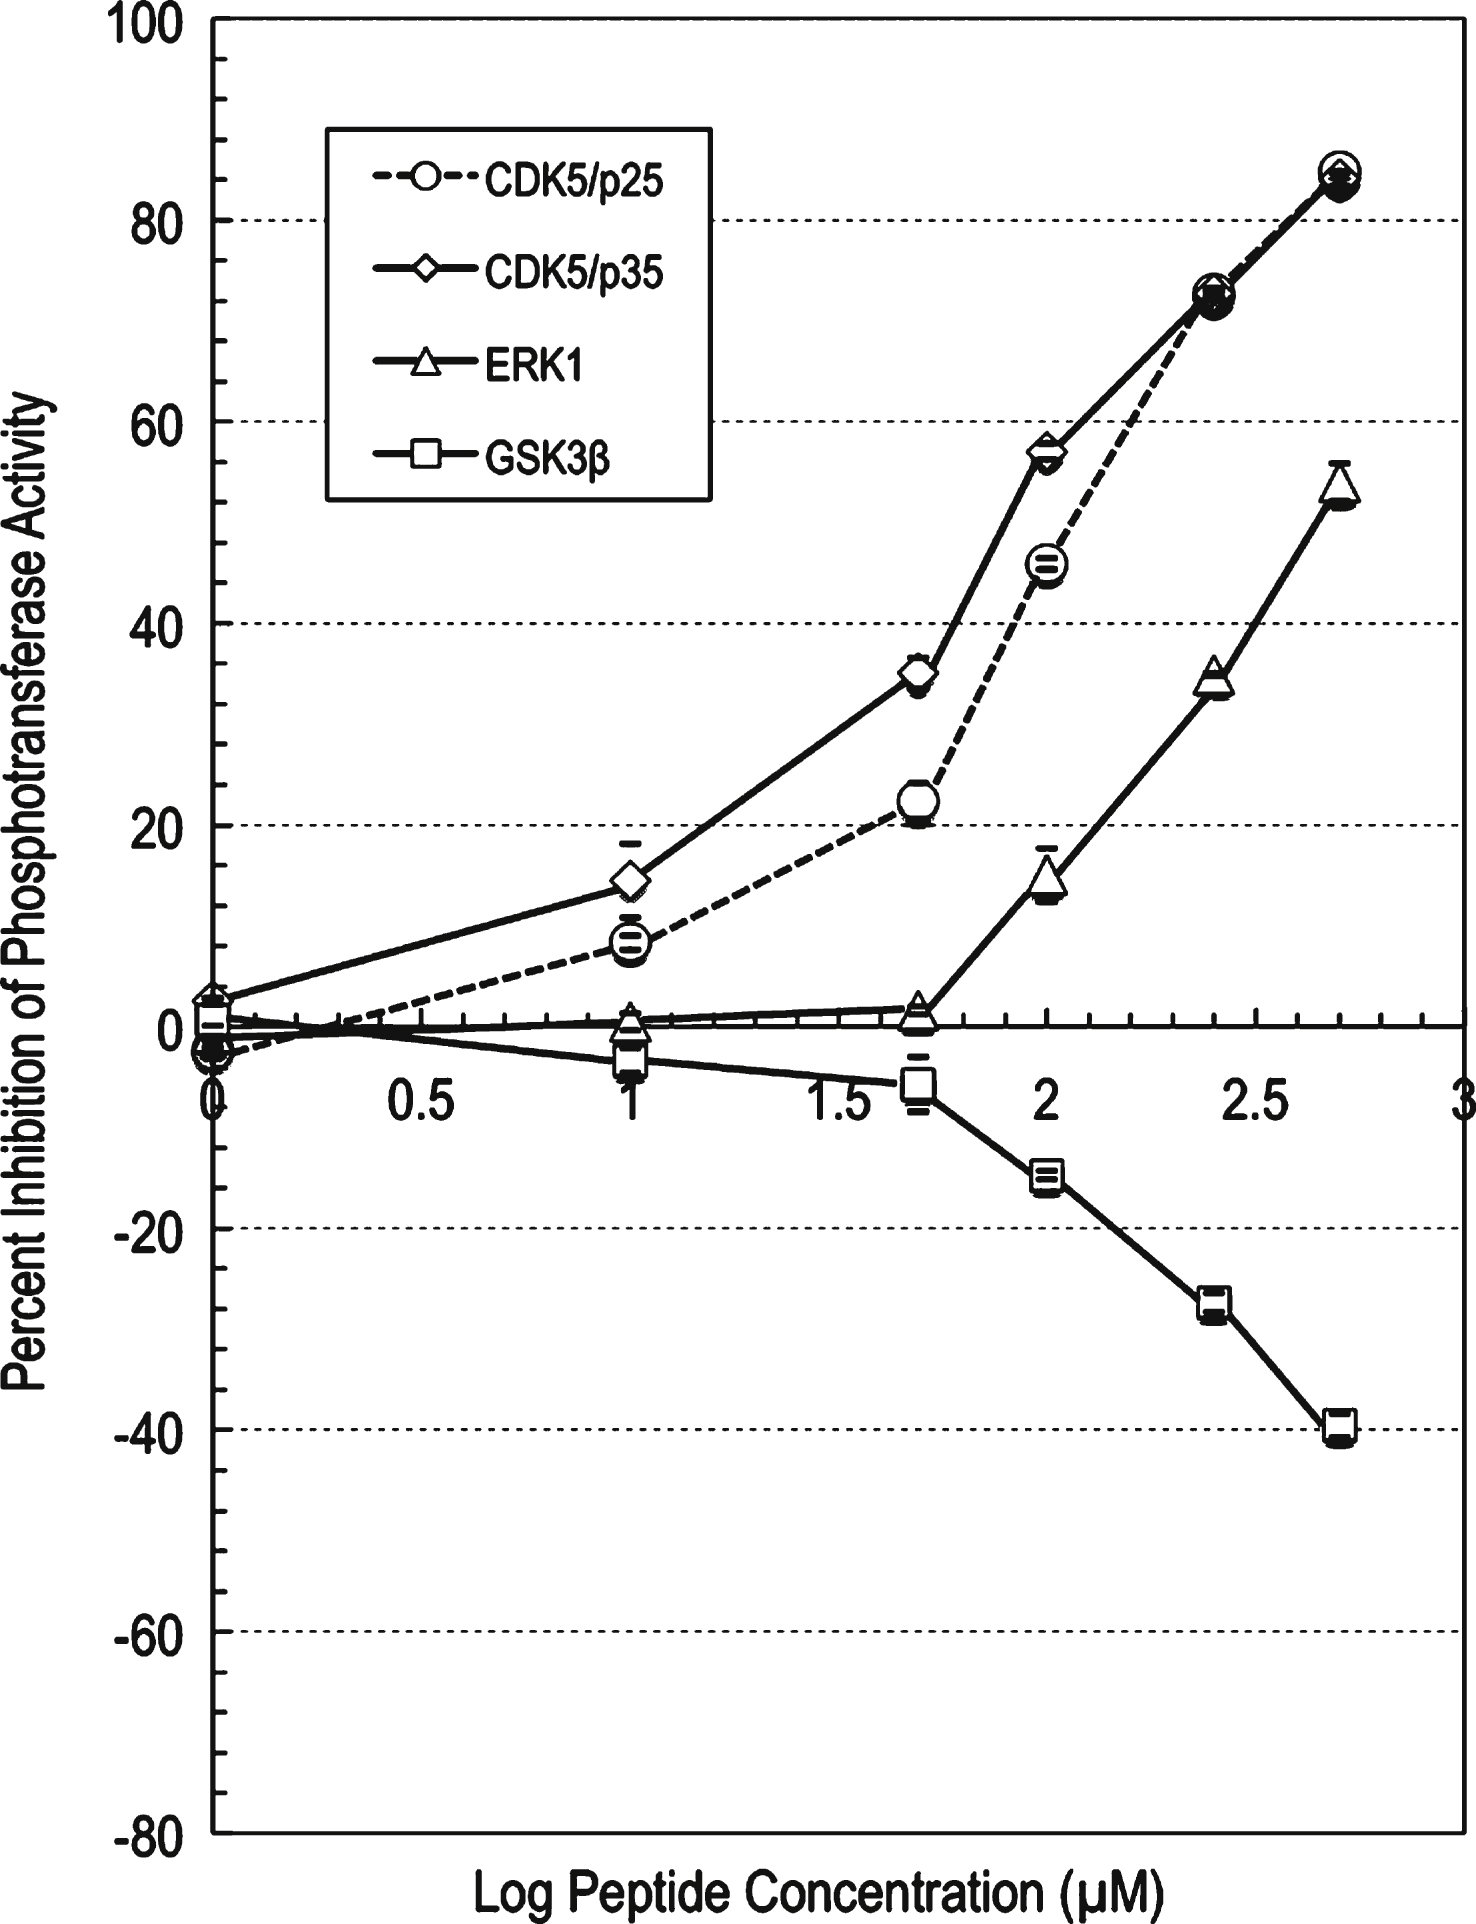 p5-MT peptide concentration-dependent effects on the phosphotransferase activities of CDK5, ERK1, and GSK3β. IC50 determination for compound p5-MT against protein kinases. A graph of log inhibitor versus normalized response with variable slope was generated using the Prism software. The graph showed increased inhibition of the phosphotransferase activities of CDK5 and ERK1, and increased stimulation of GSK3β with increasing compound concentration. The IC50 value for compound p5-MT against CDK5/p25 was determined to be 119 μM, the IC50 value for compound p5-MT against CDK5/p35 was determined to be 83 μM, and the IC50 value for compound p5-MT against ERK1 was determined to be 425 μM.